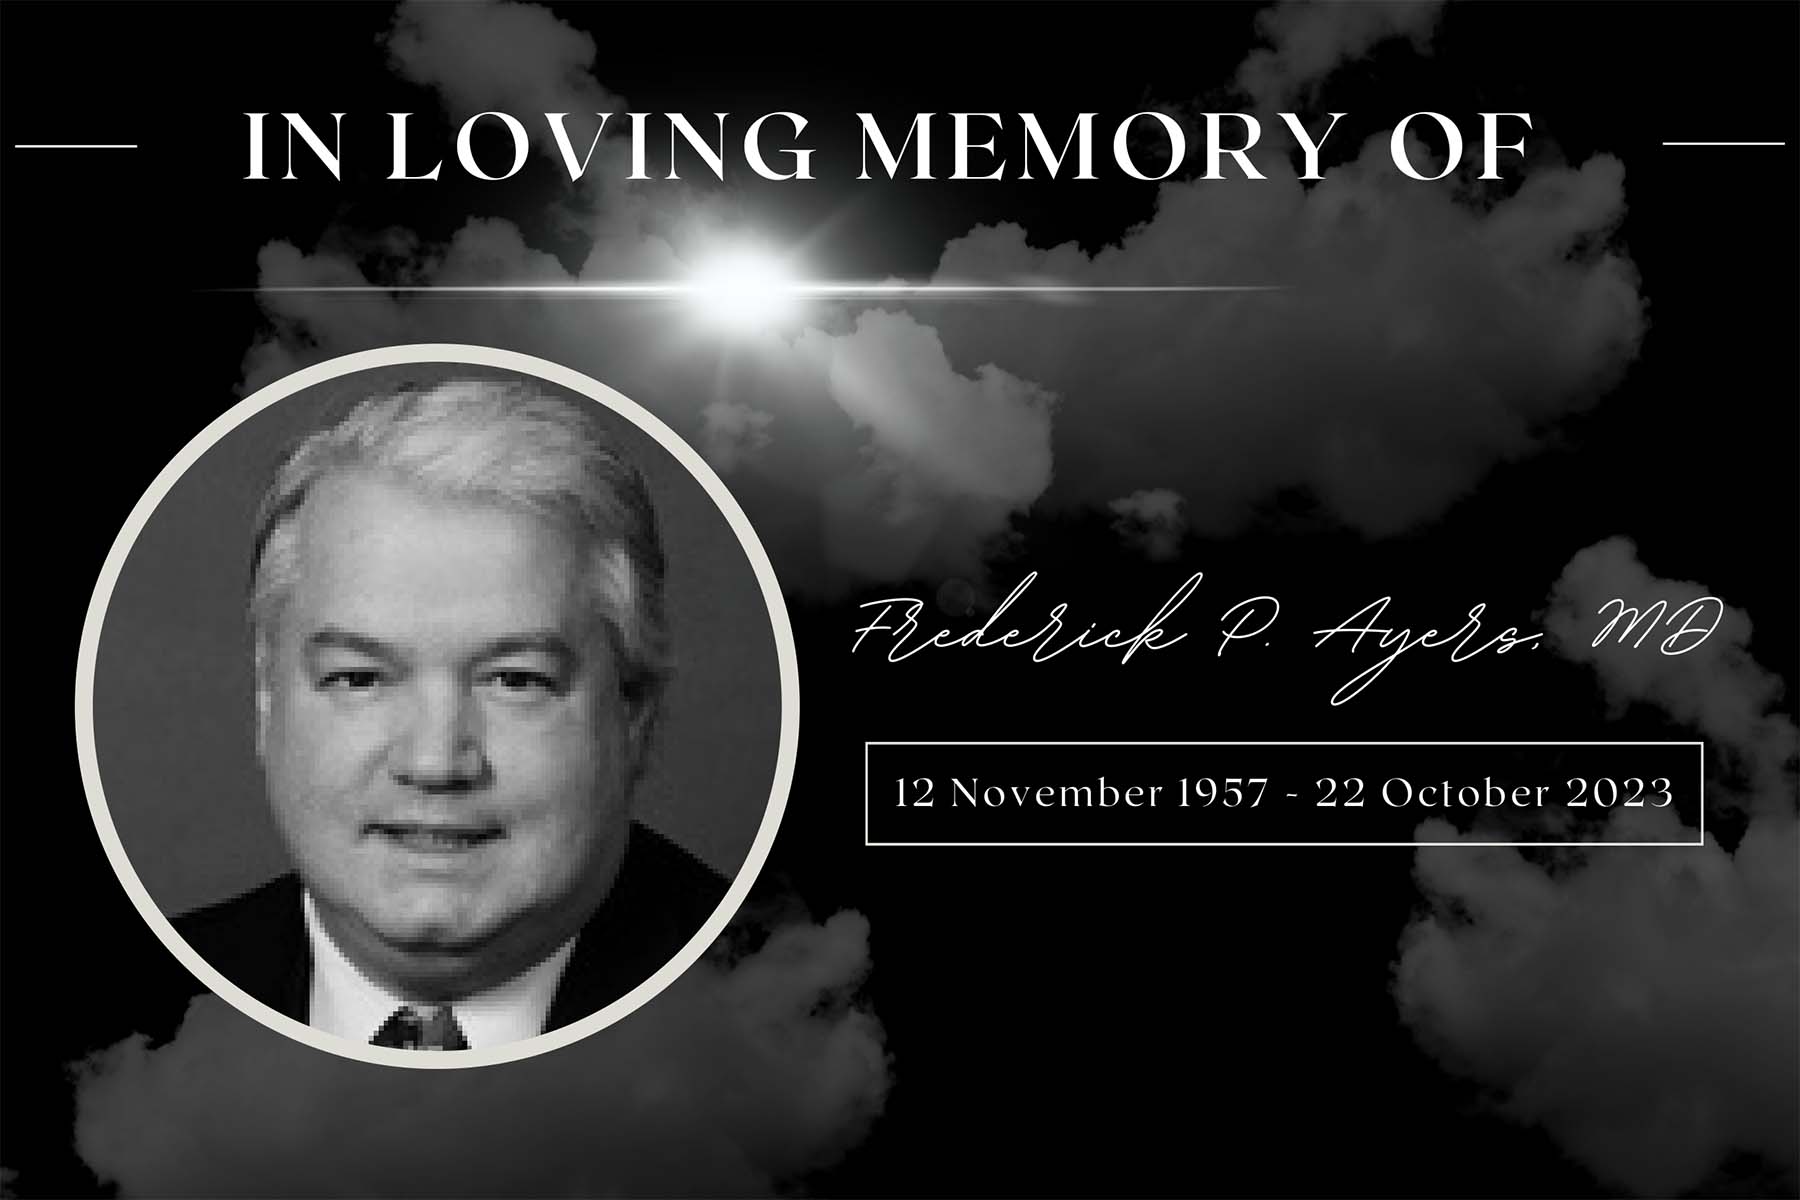 In Loving Memory of Frederick P. Ayers, MD